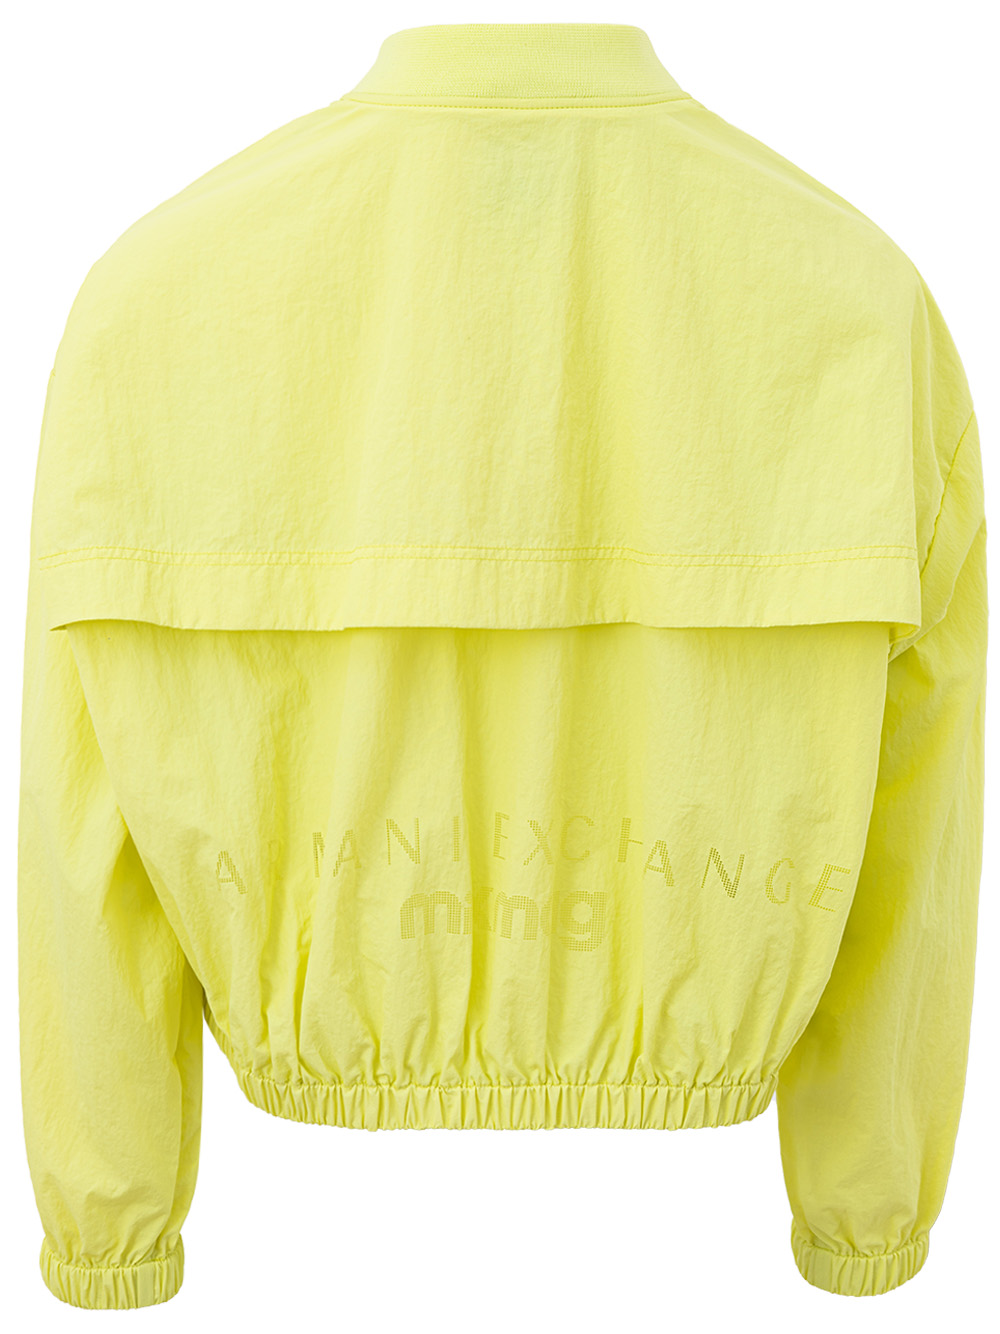 Armani Exchange Yellow Technical Jacket • Fashion Brands Outlet